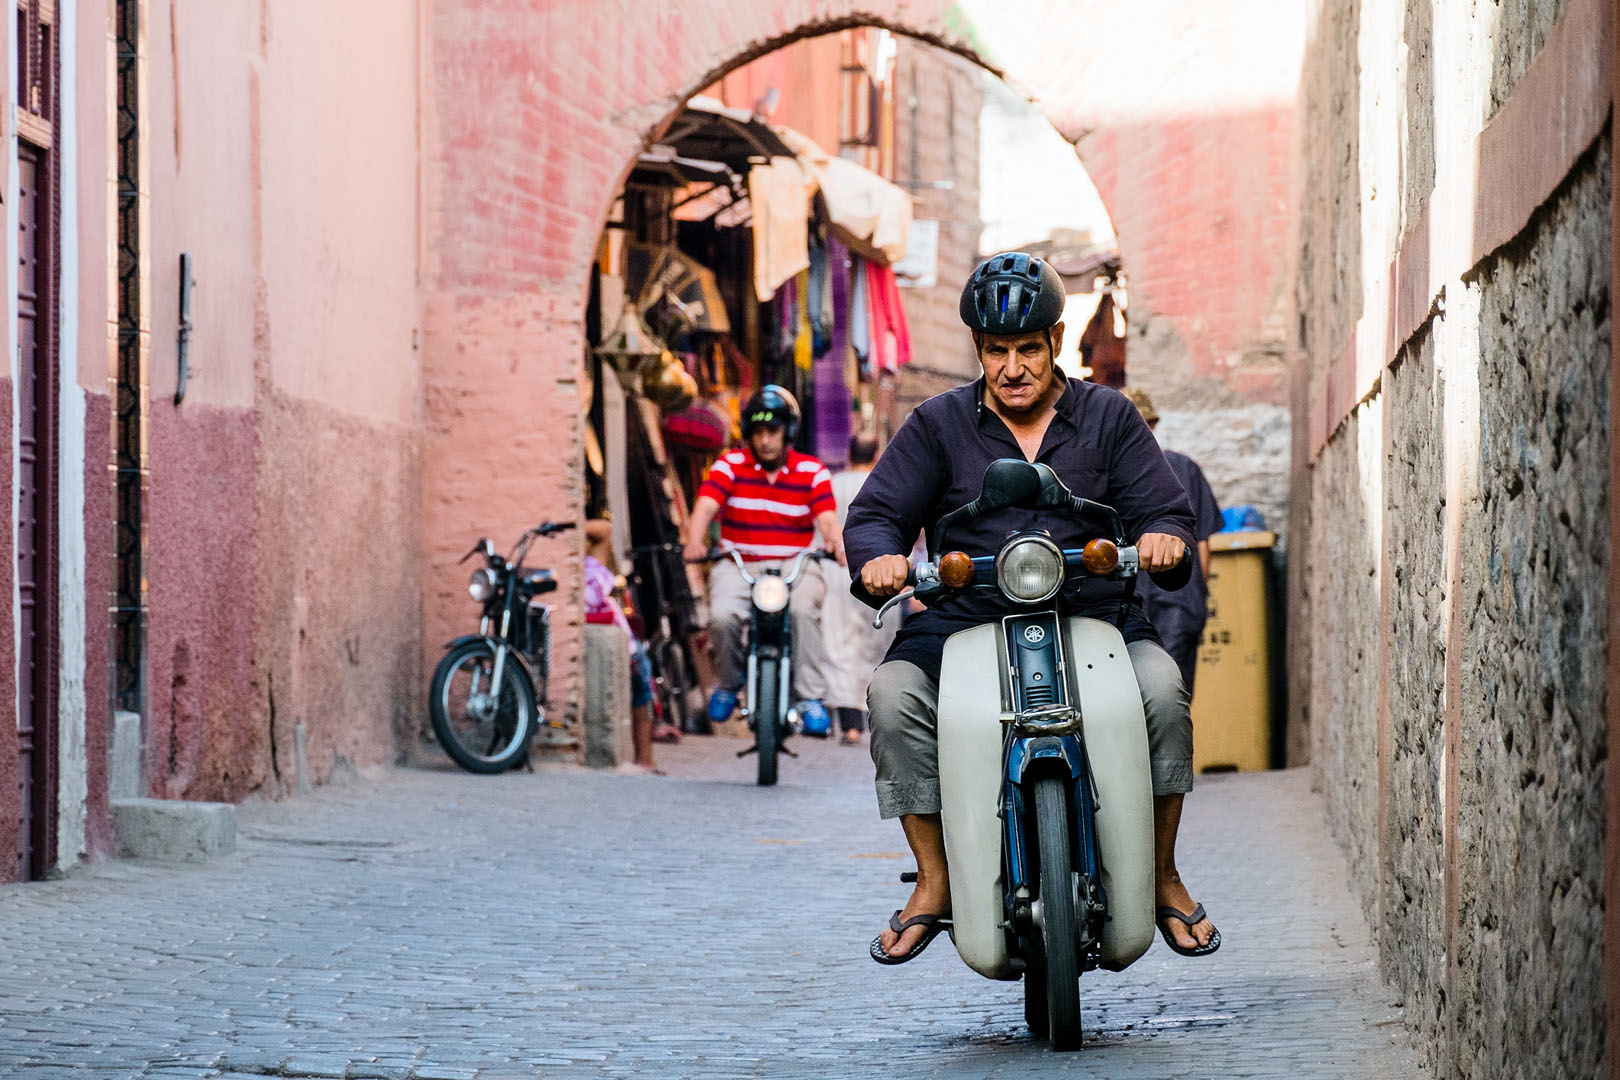 Scooter racing around Marrakech side streets